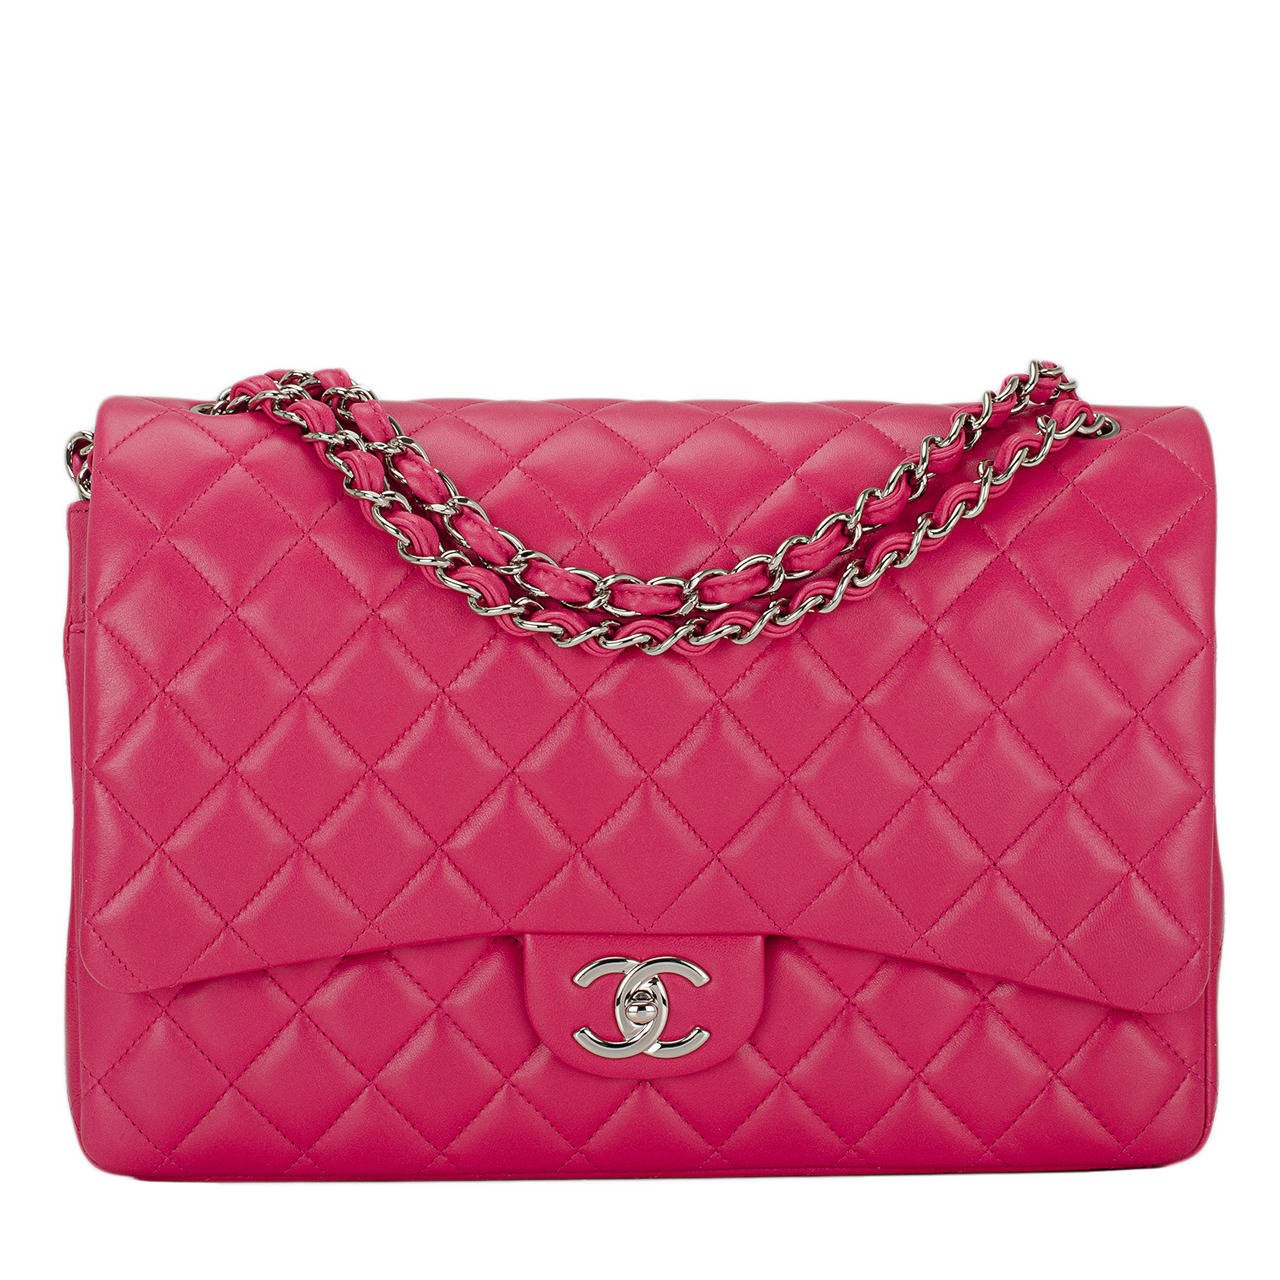 Chanel Fuchsia Pink Quilted Lambskin Maxi Classic Double Flap Bag